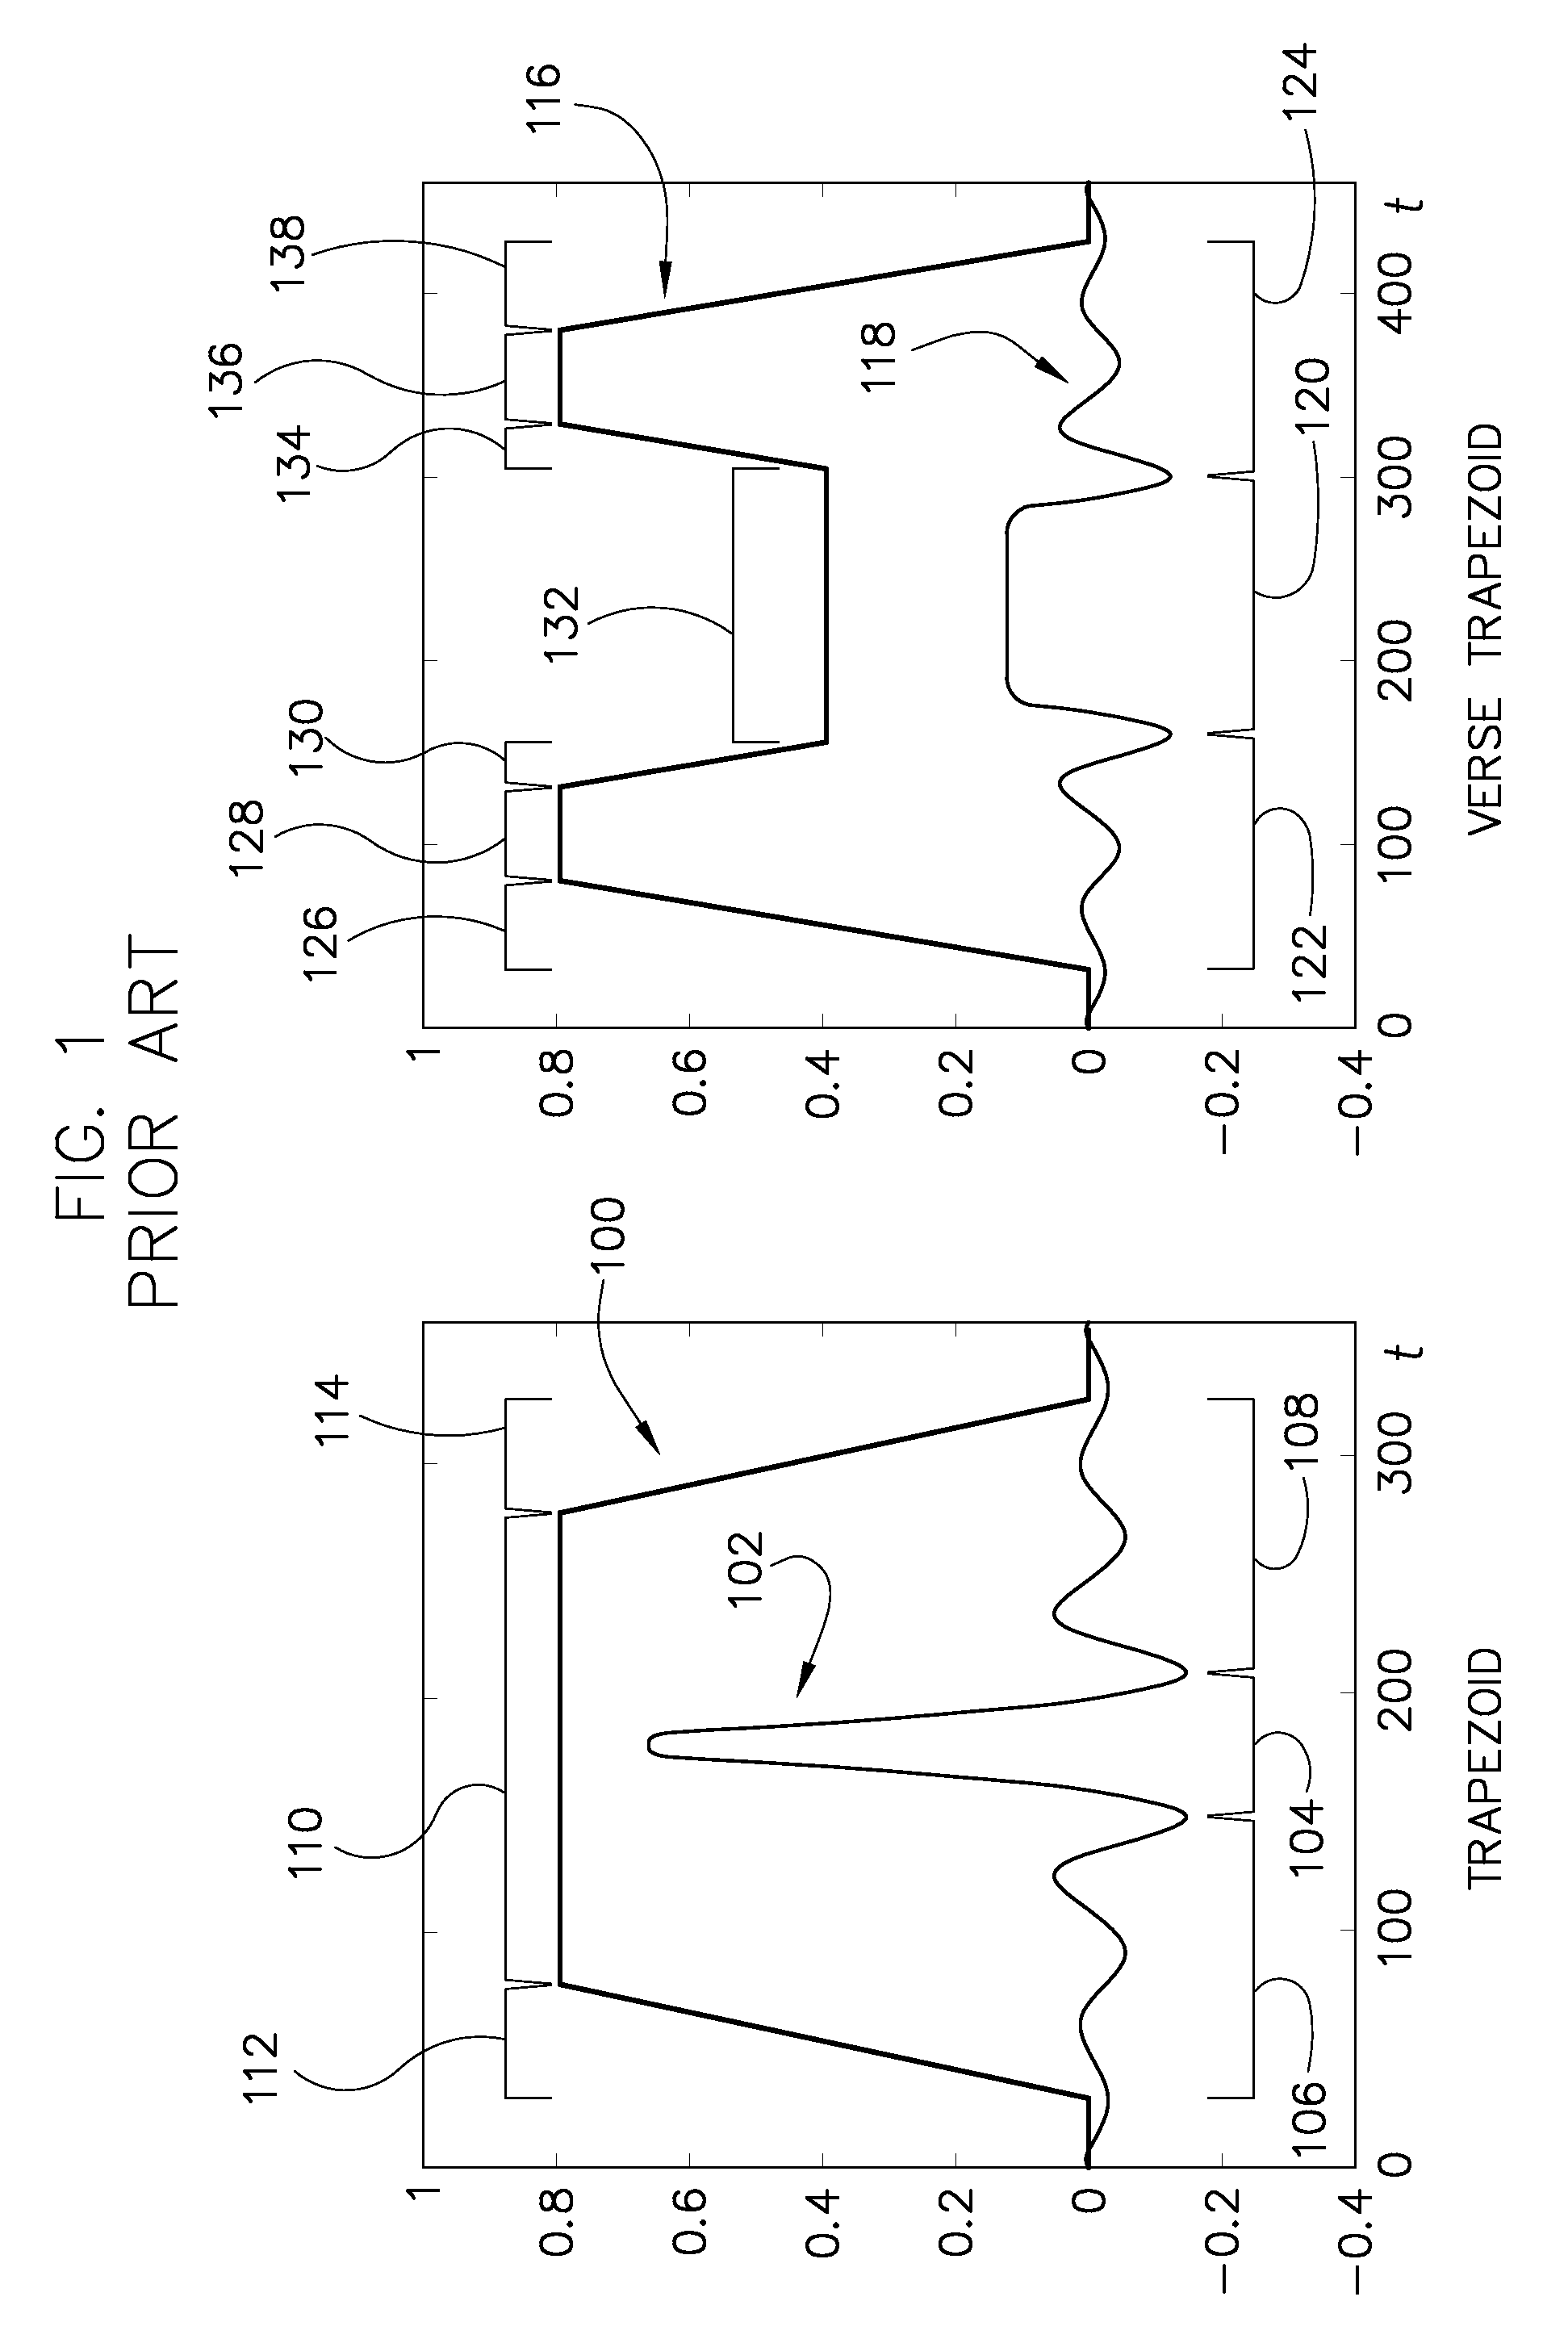 System and method for amplitude reduction in RF pulse design